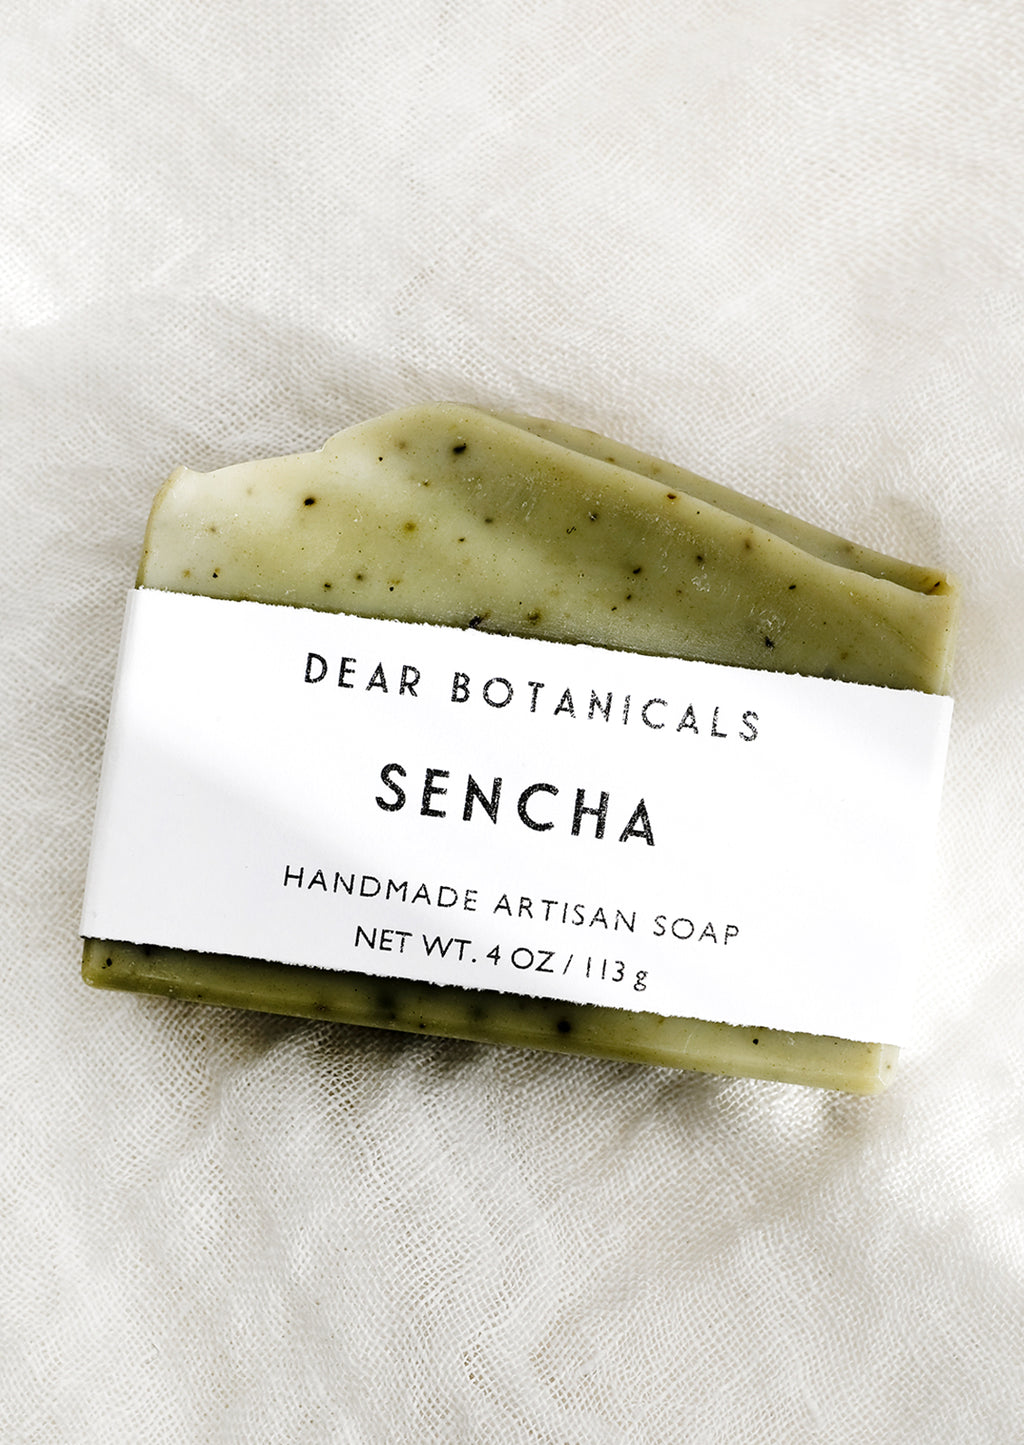 Sencha: A bar of soap in sencha scent (green with black speckles).